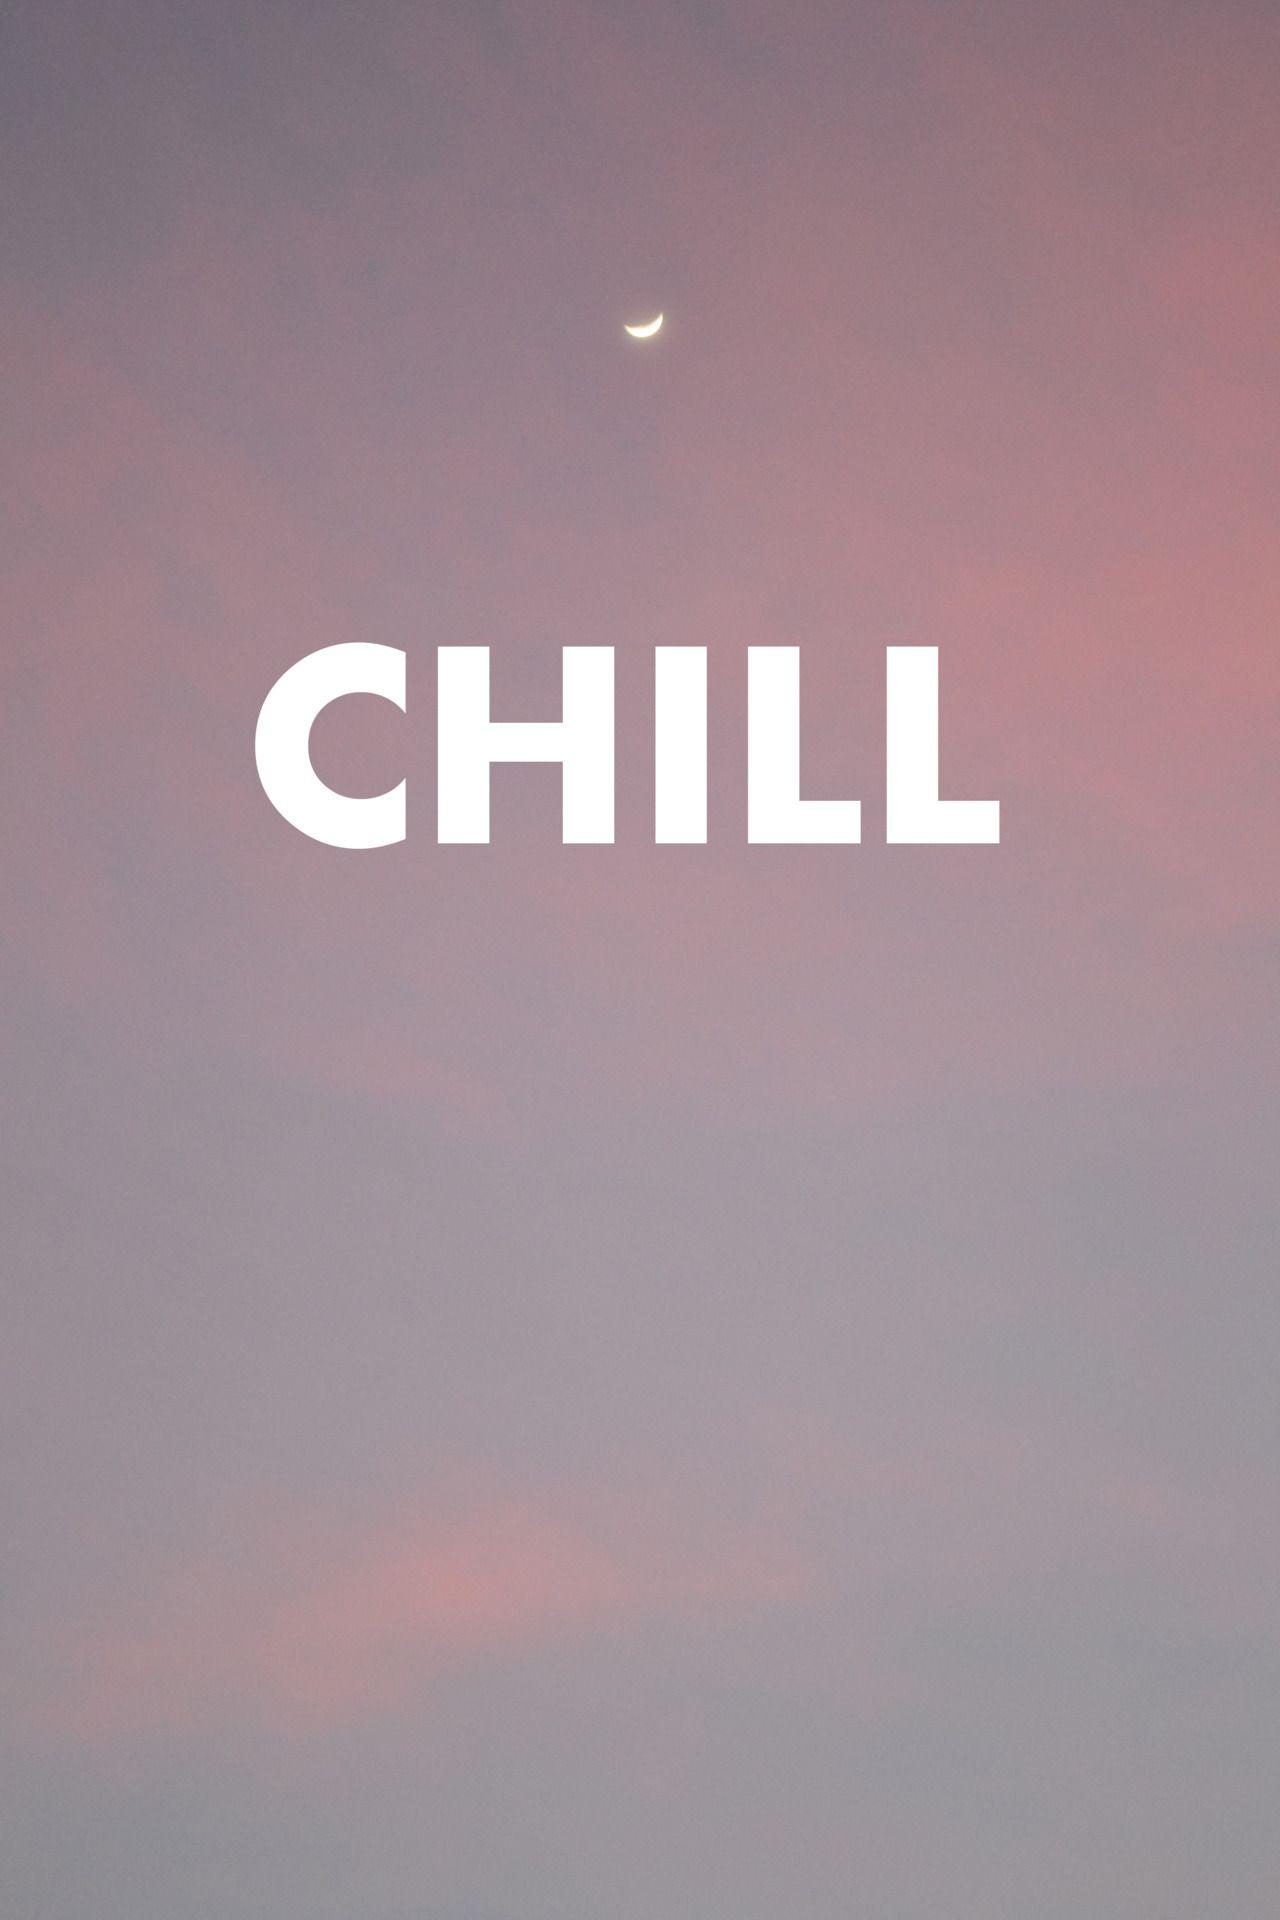 Chill iPhone 6 Wallpaper Free Chill iPhone 6 Background